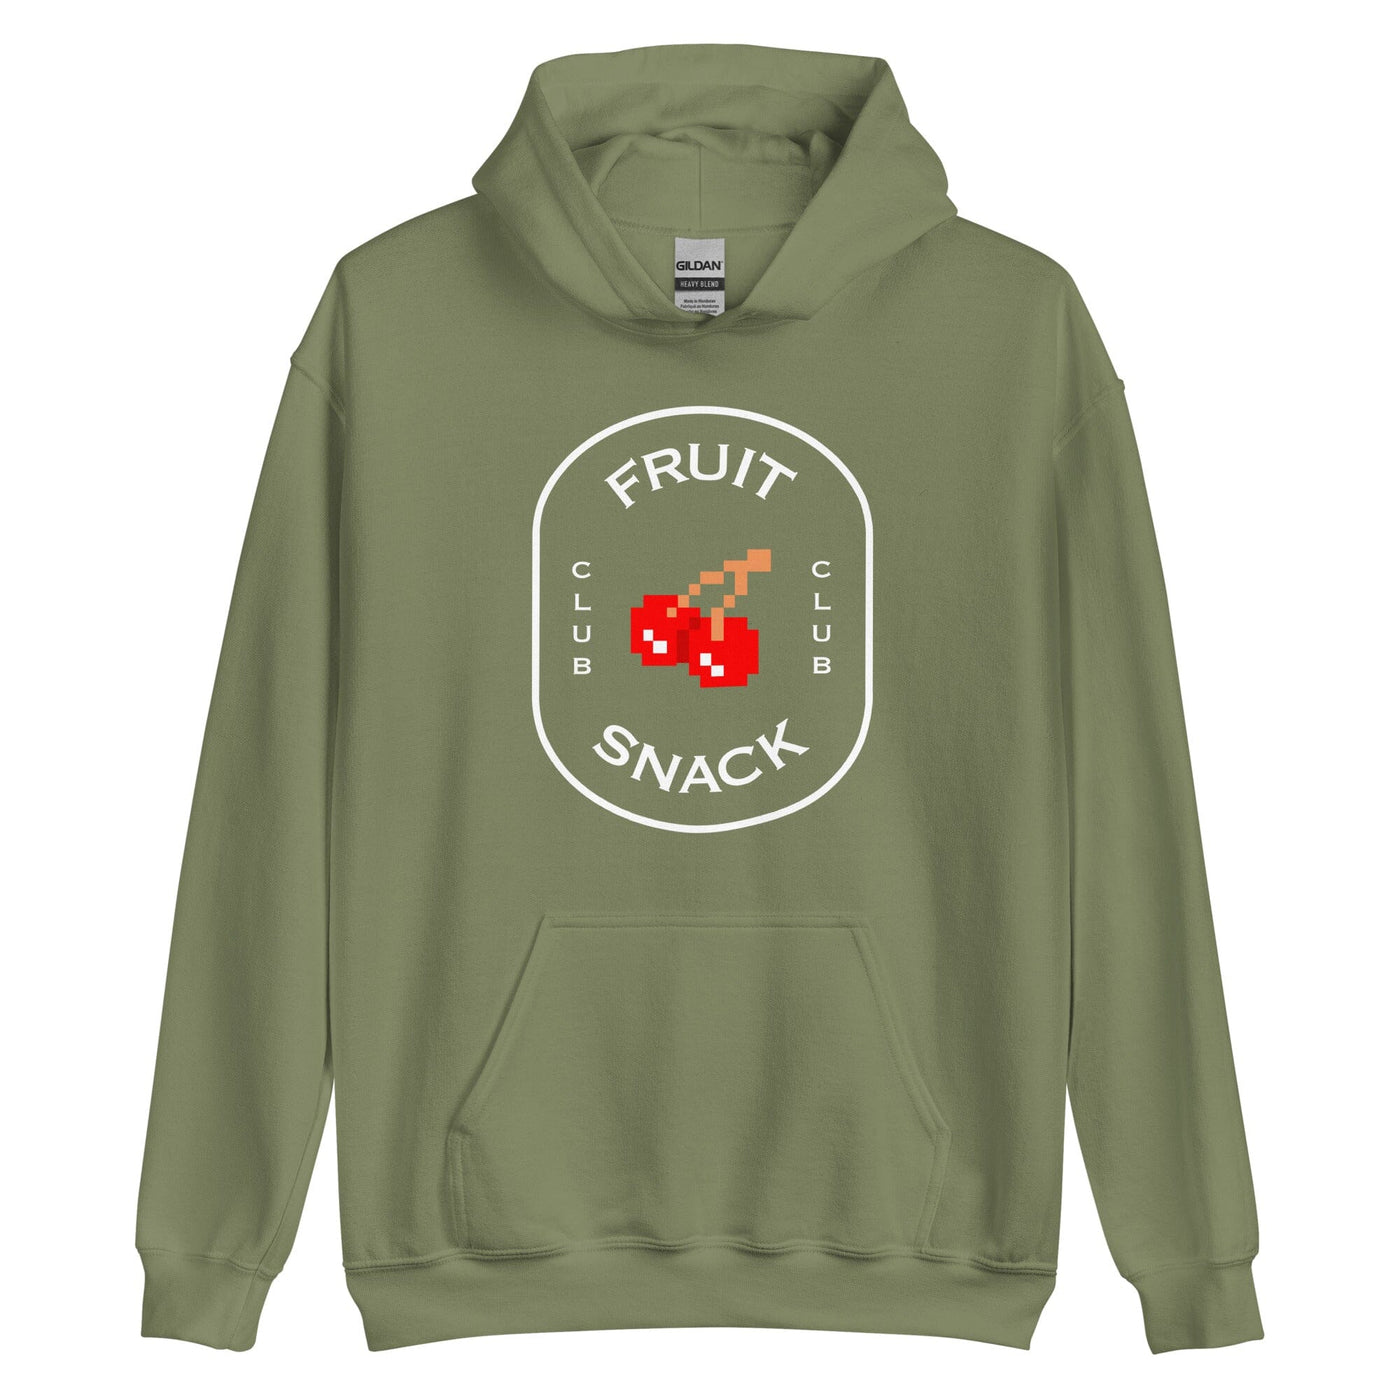 Fruit Snack Club | Unisex Hoodie | Retro Gaming Threads & Thistles Inventory Military Green S 